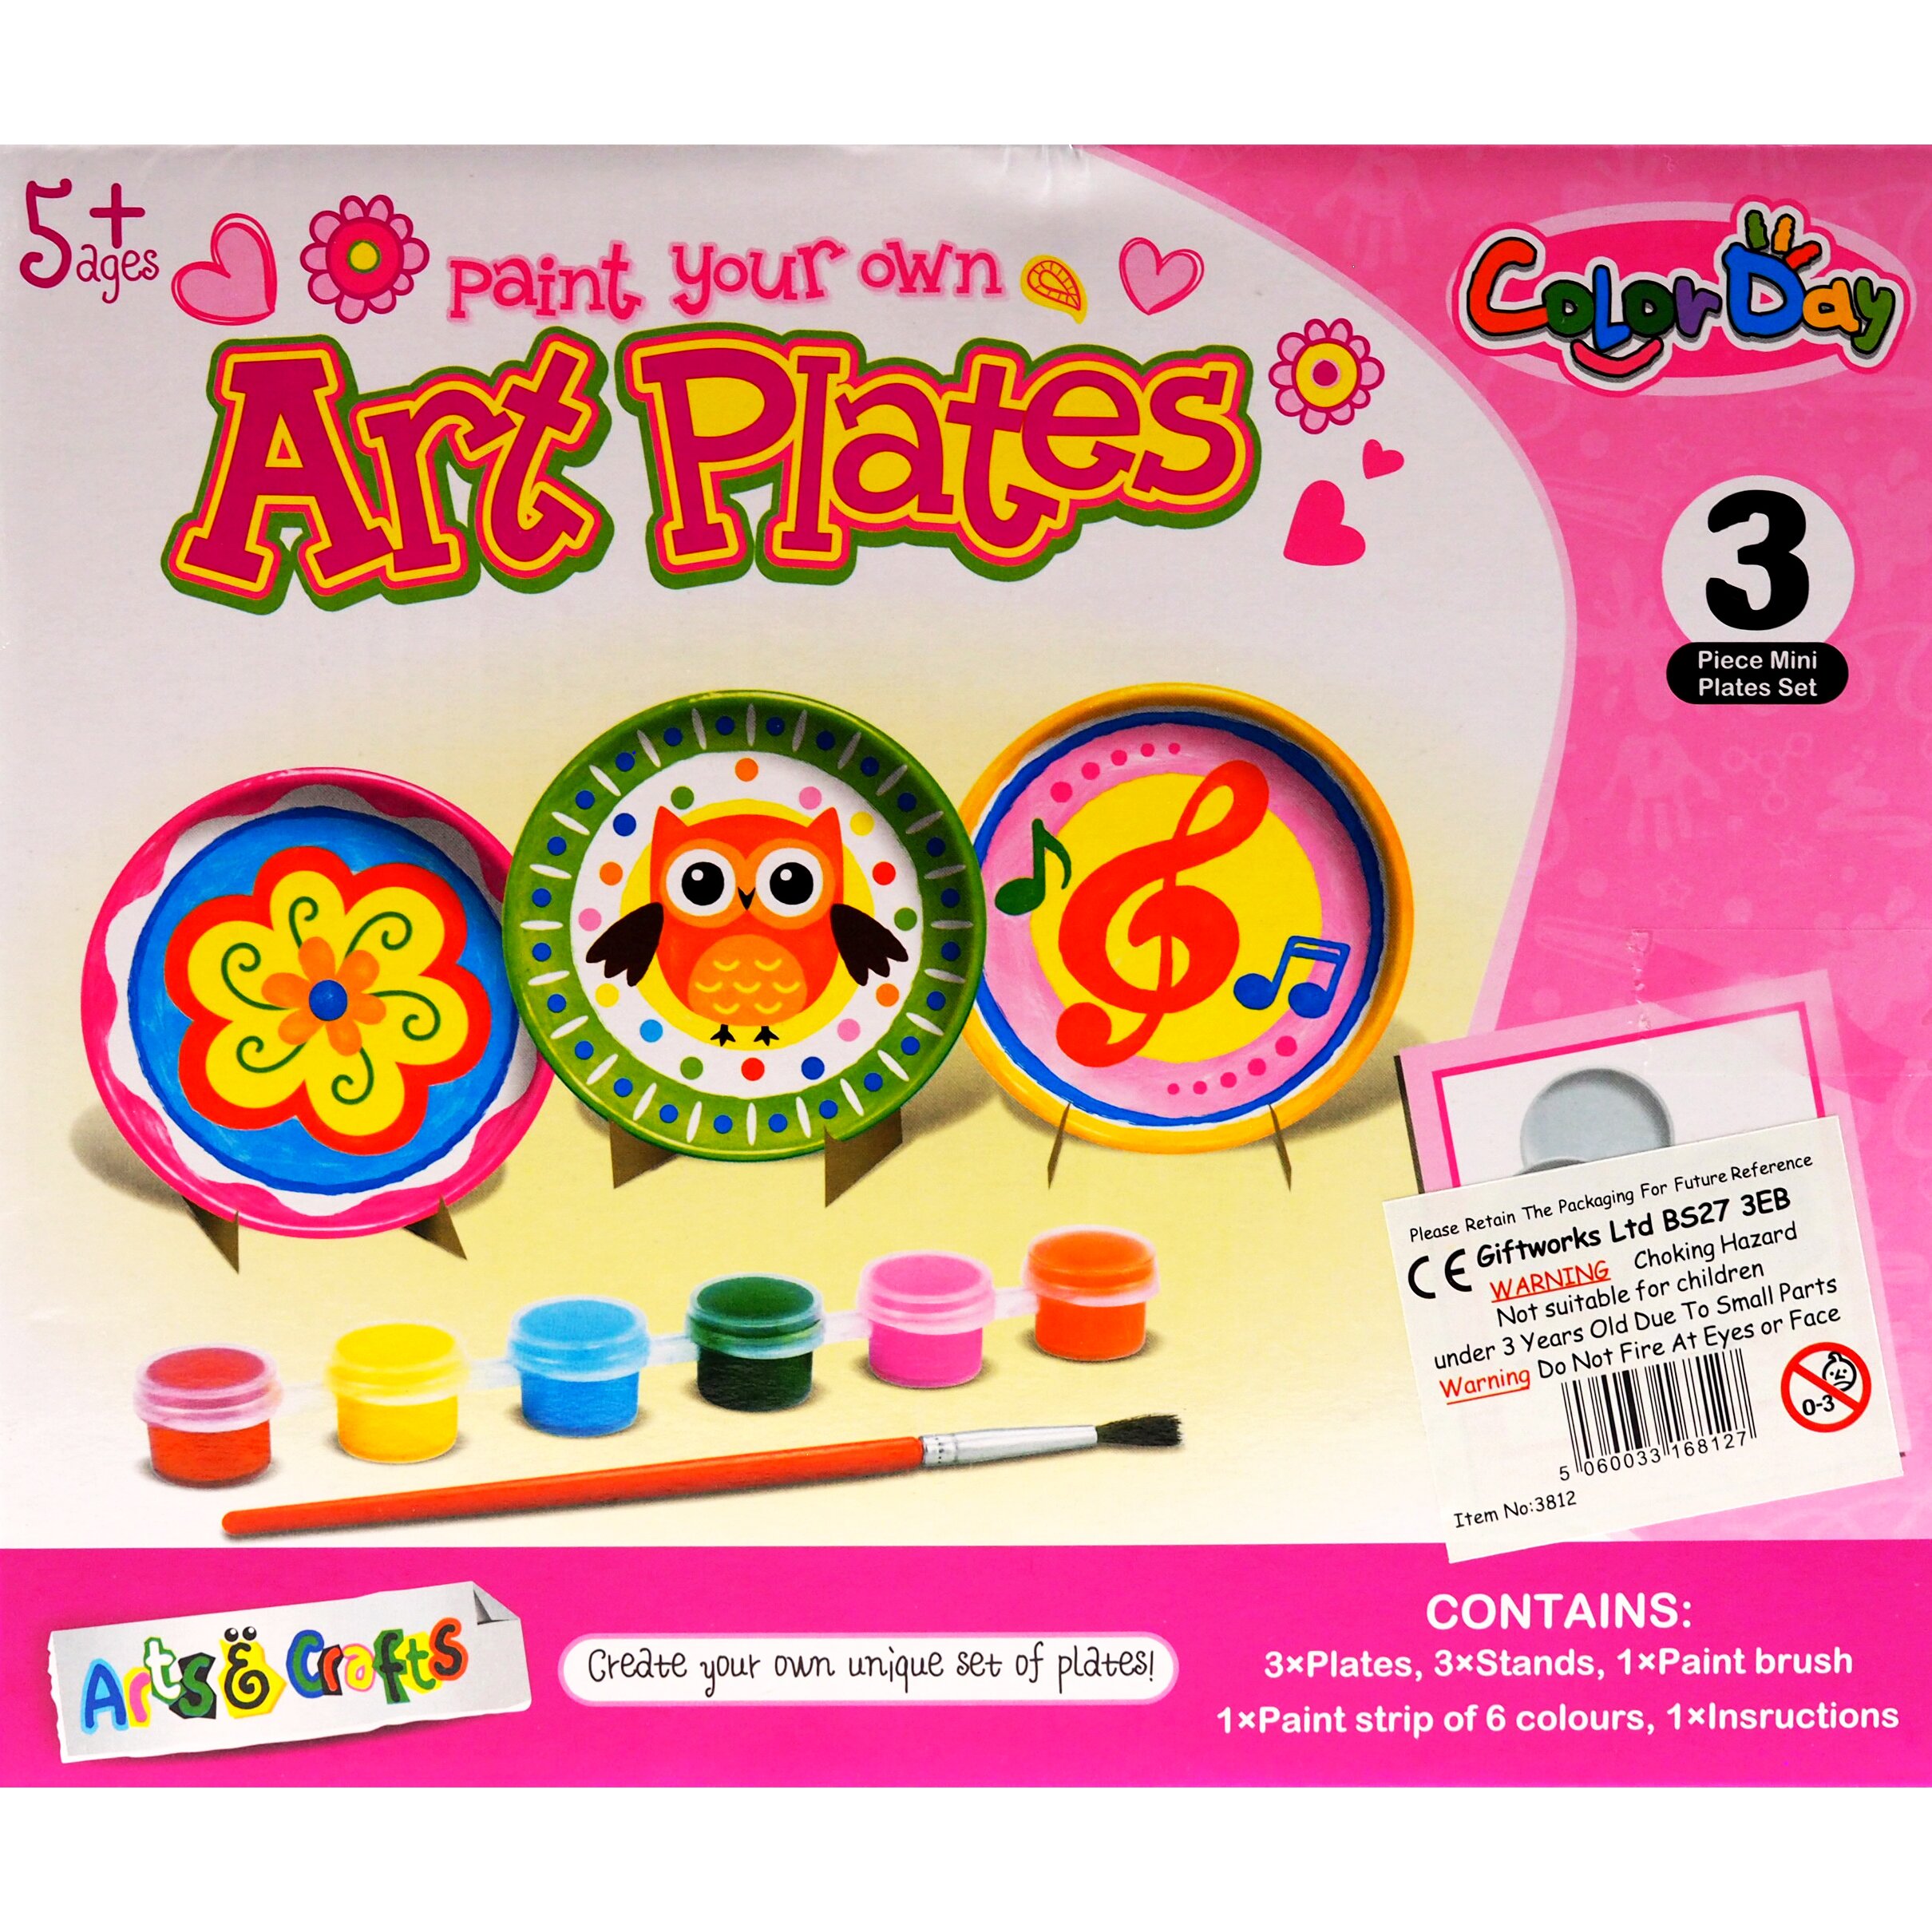 Complete Craft Kits - Paint And Design Your Own Art Magnets And Plates (Set of 2)